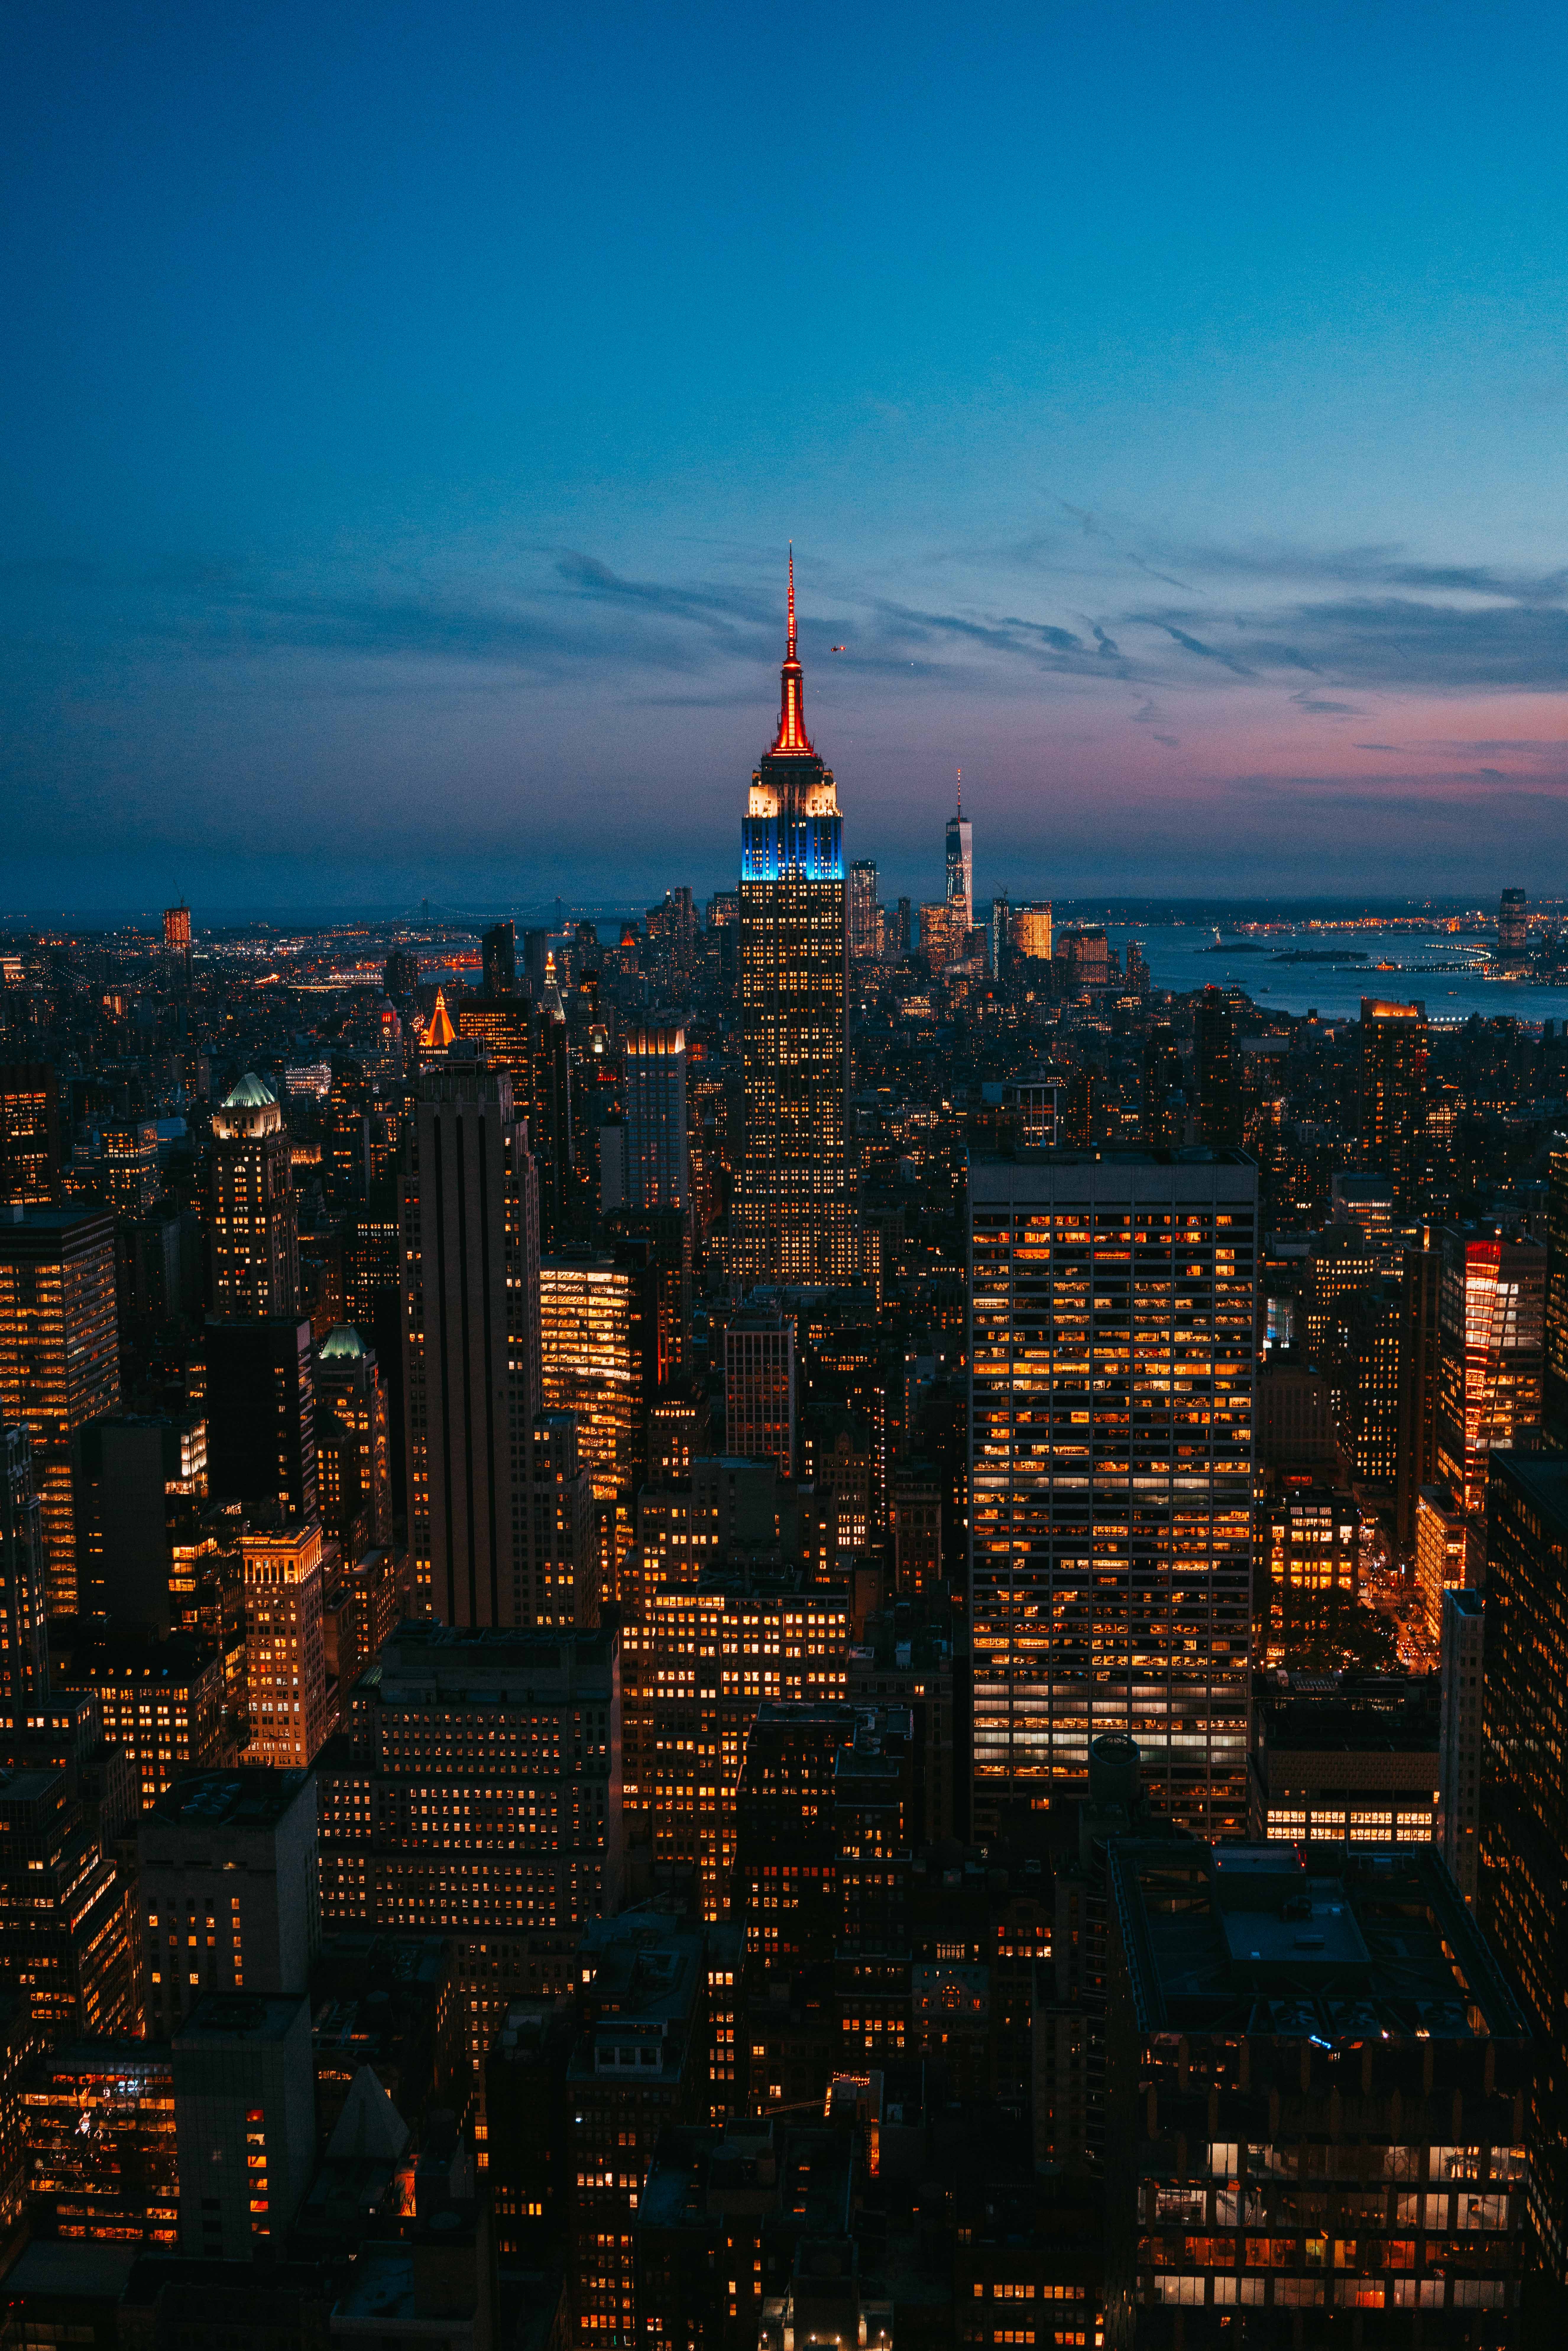 cities, night city, usa, skyscraper, view from above, city lights, united states, megapolis, megalopolis, new york